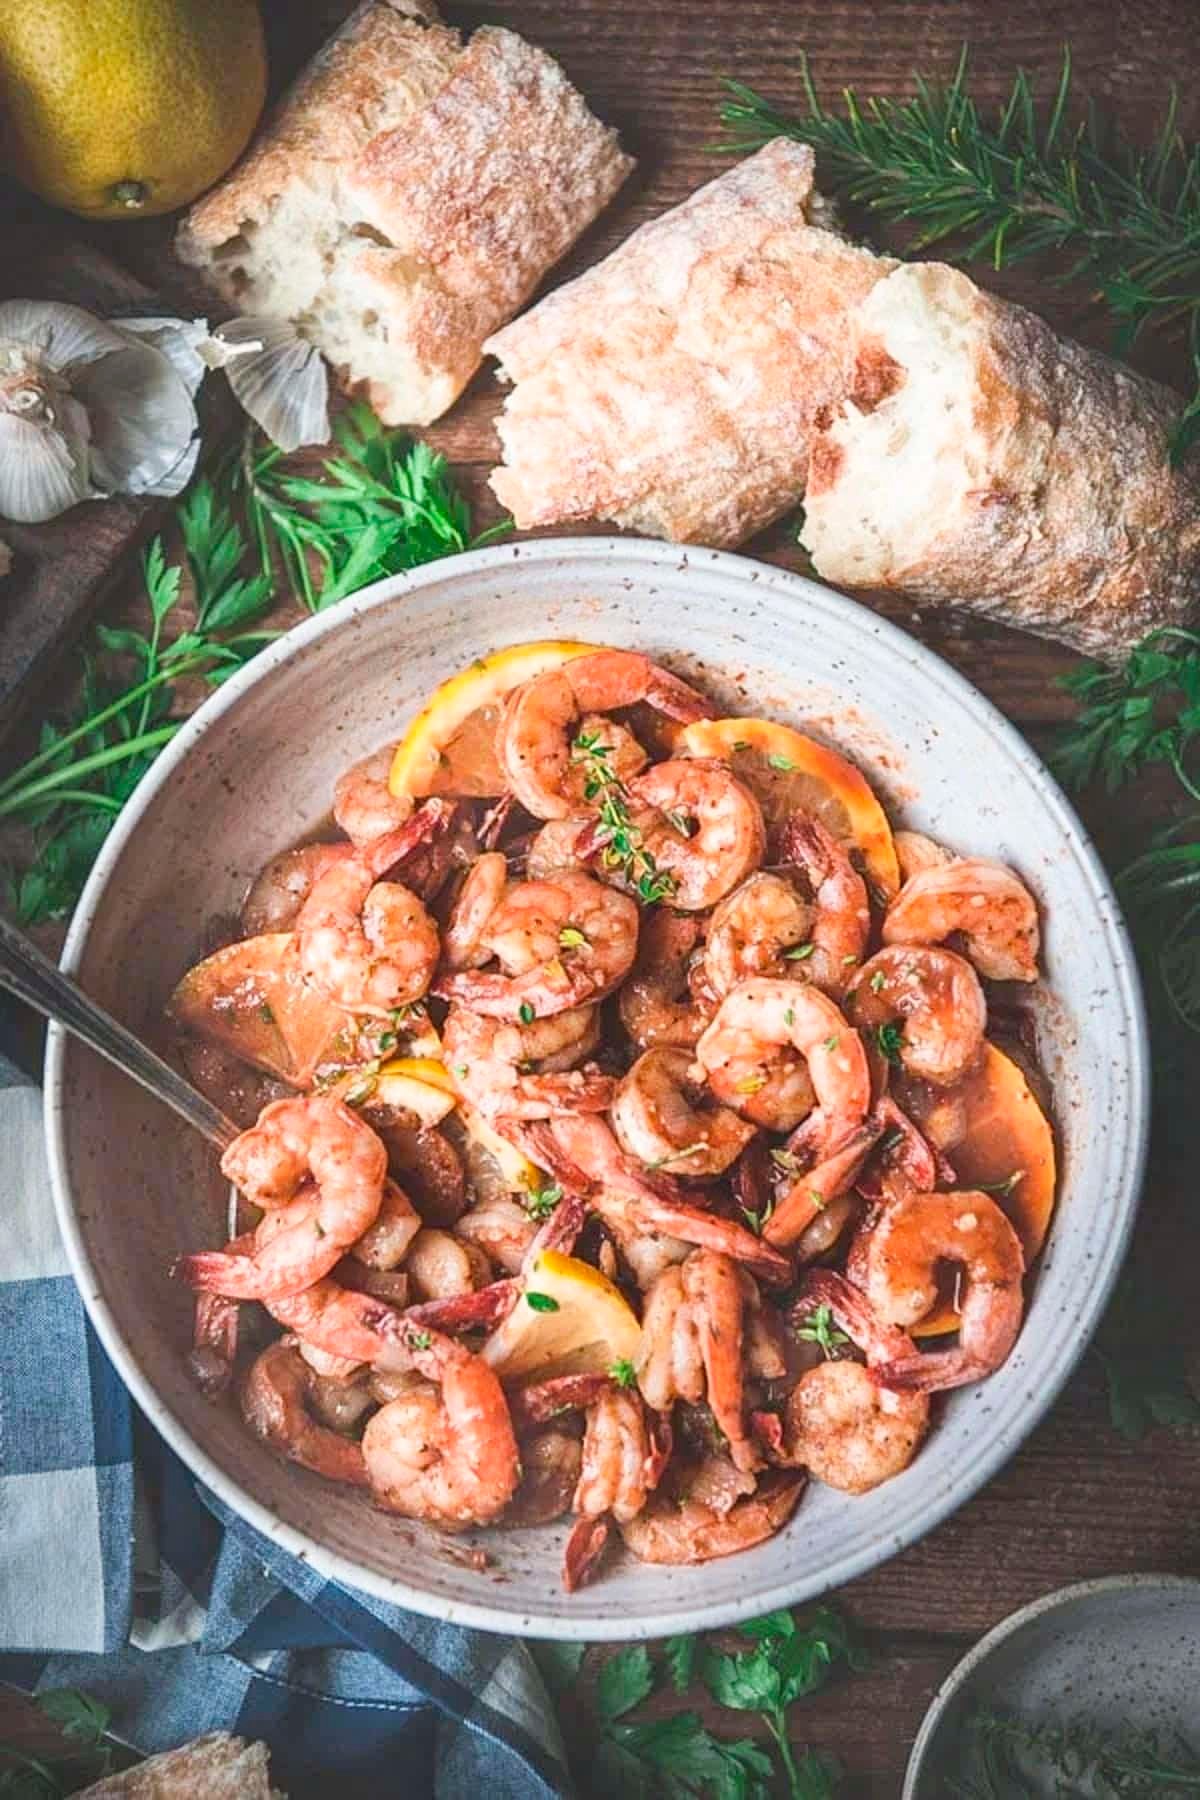 Overhead shot of garlic butter shrimp in a bowl on a wooden table with bread.